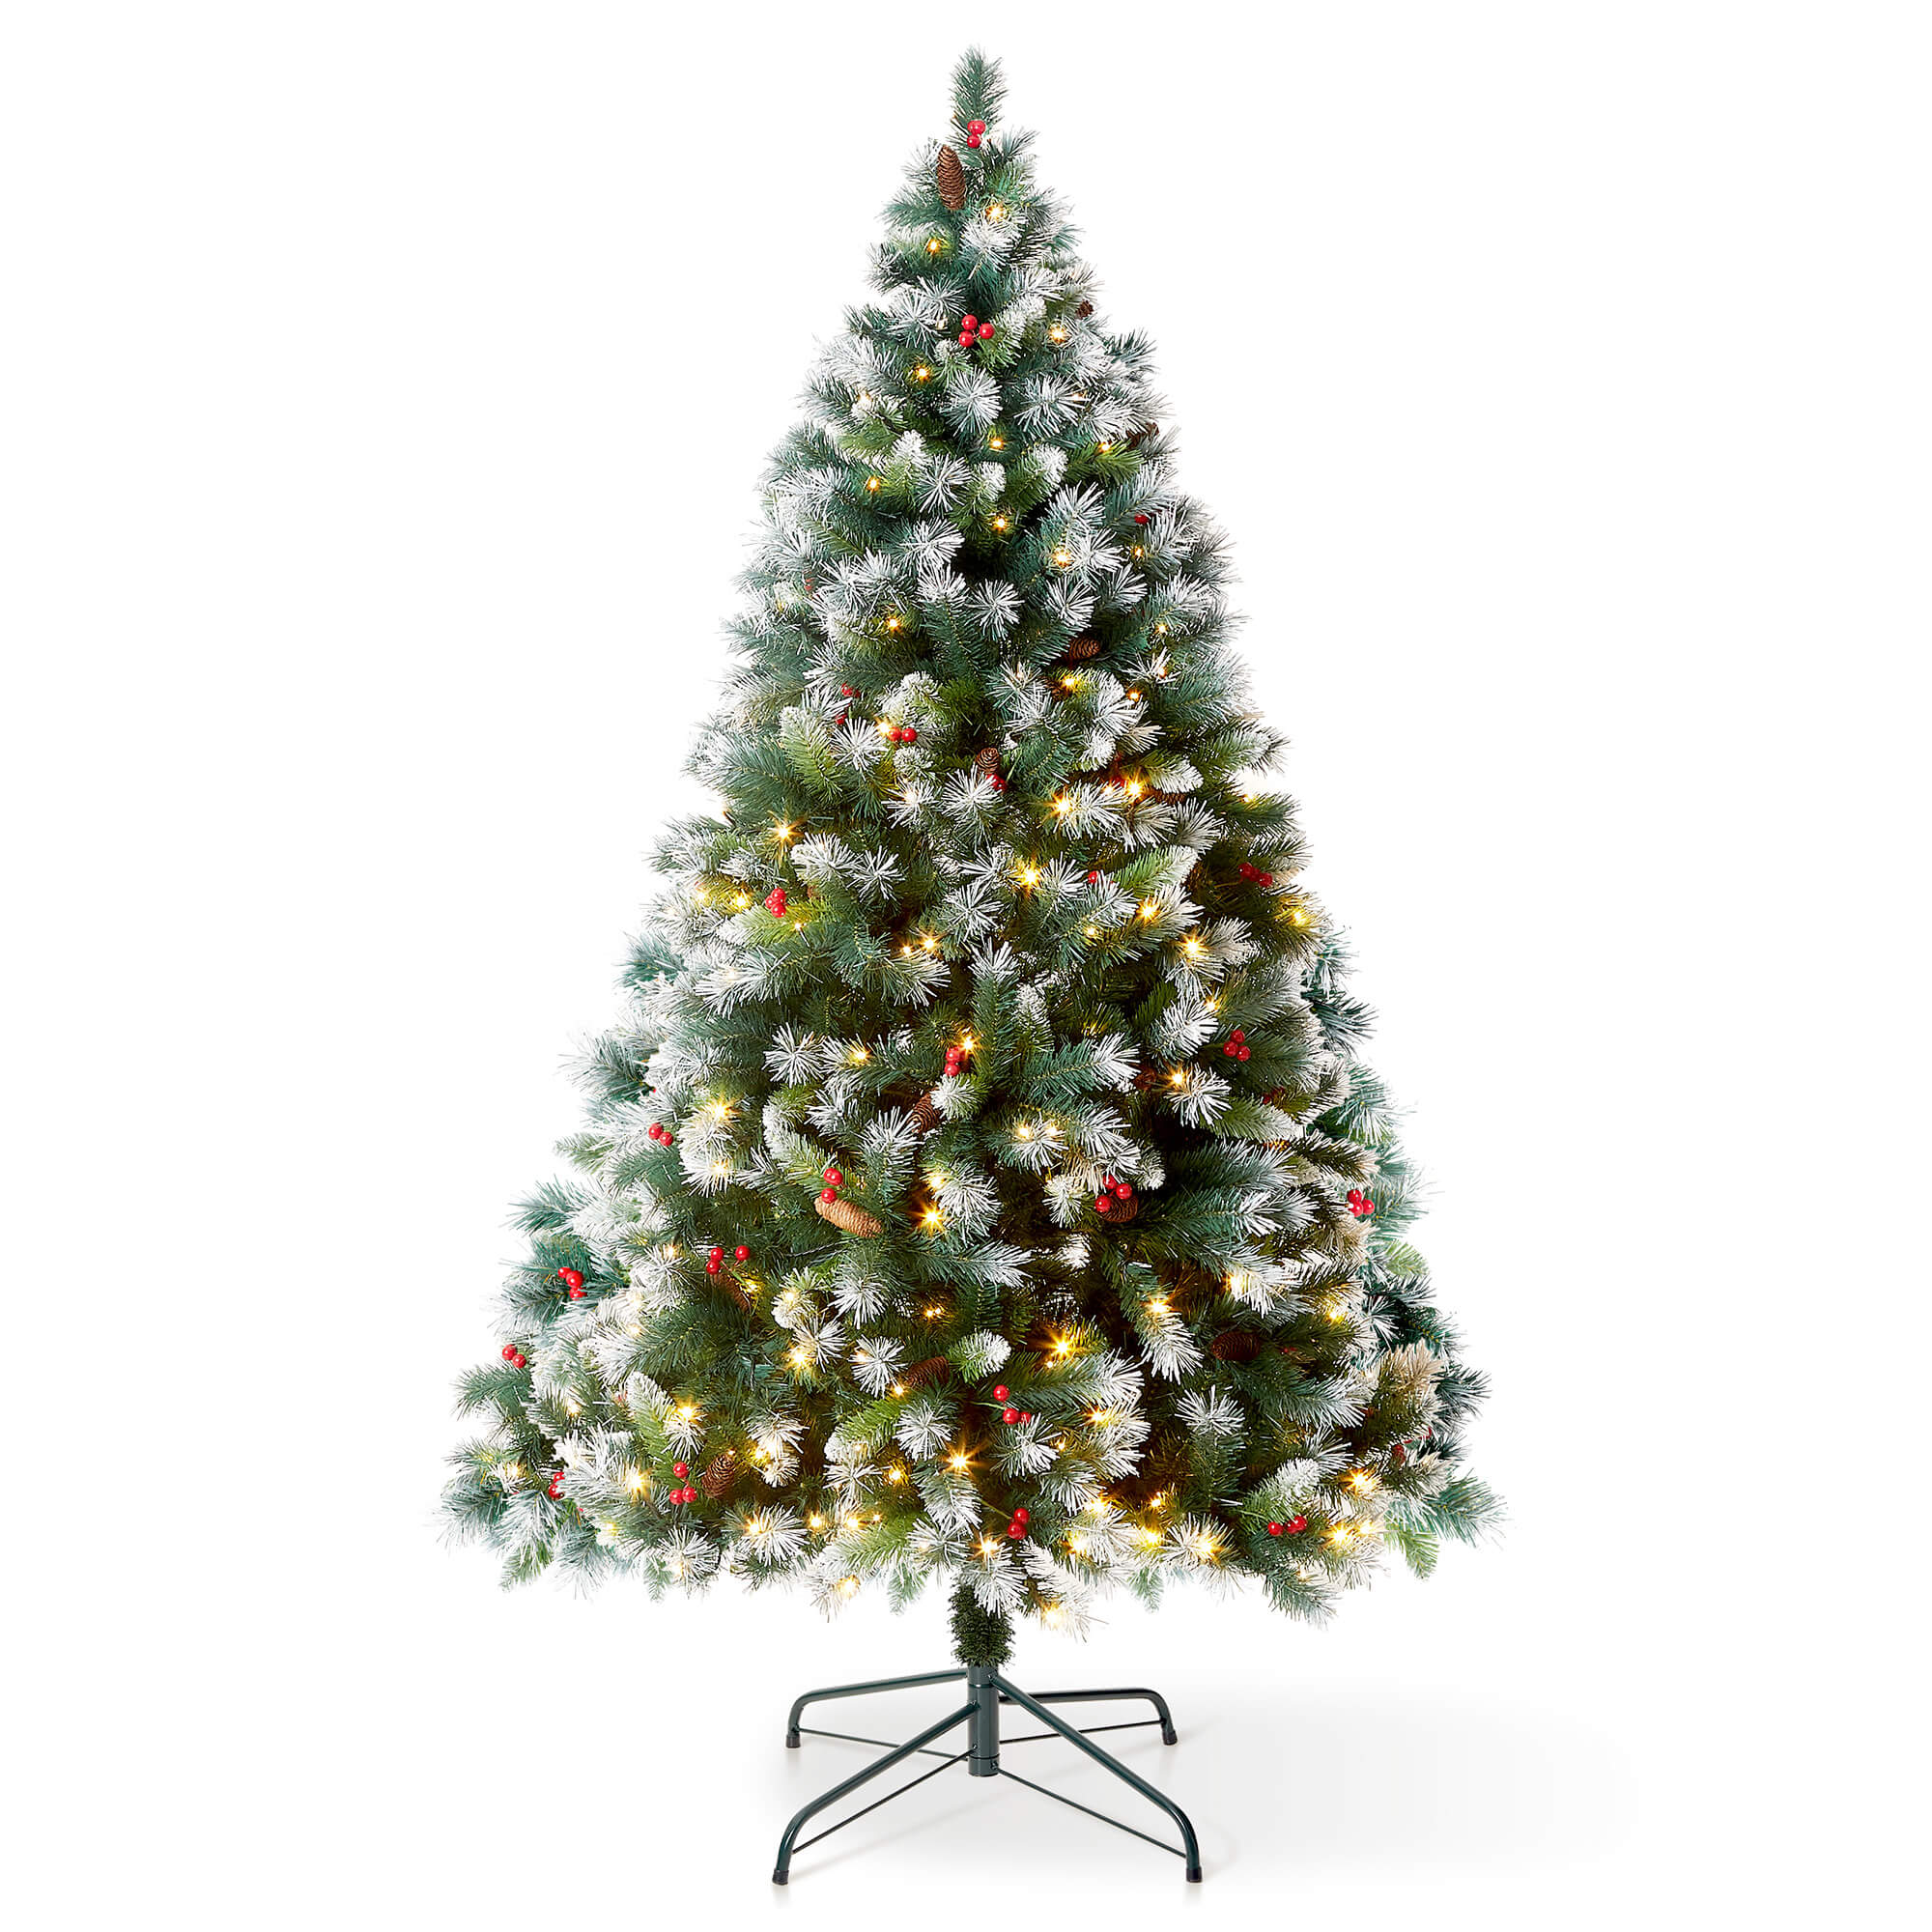 5FT Claudia Pre Lit Christmas Tree with 200LED Lights with Timer, 8 Light Modes, Decorative Pinecones and Berries